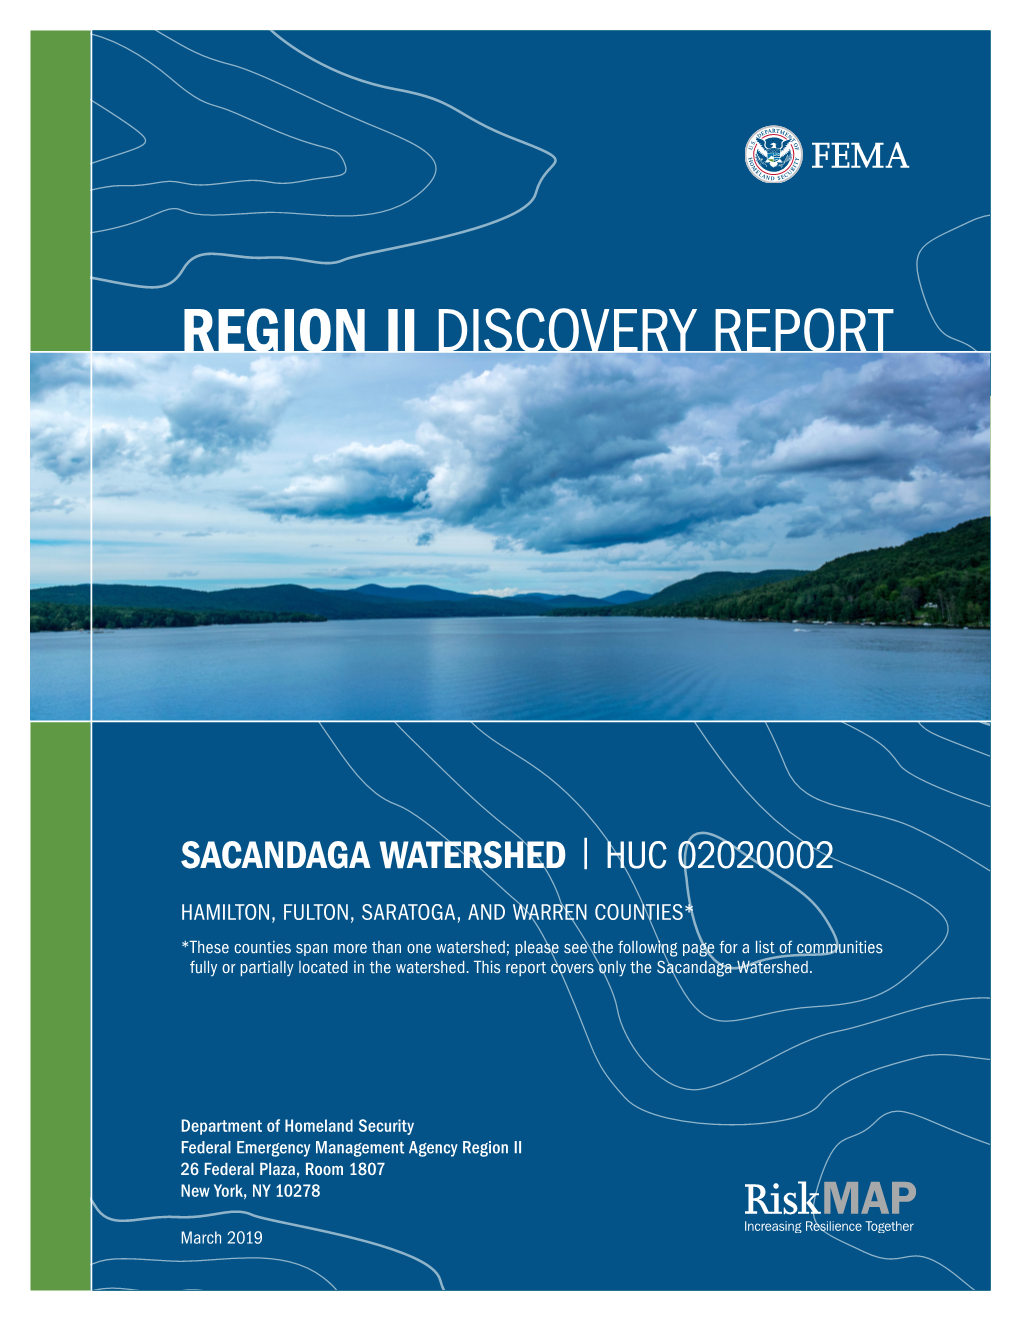 Flood Risk Discovery Report Sacandaga Watershed